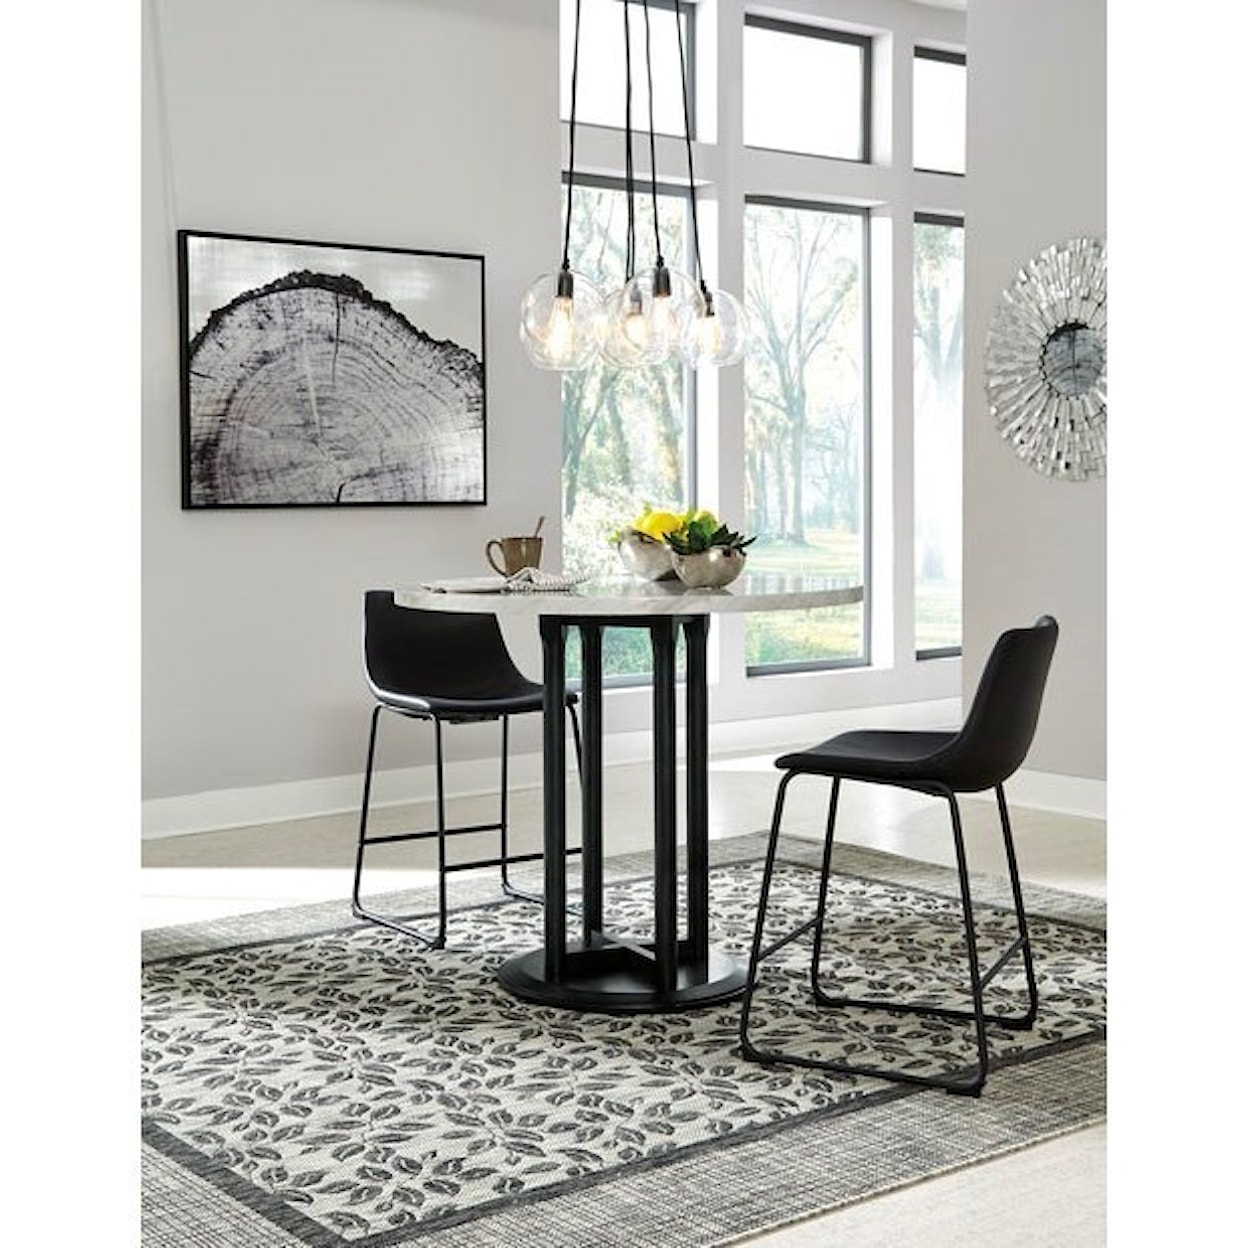 Ashley Furniture Signature Design Centiar Round Dining Room Counter Table